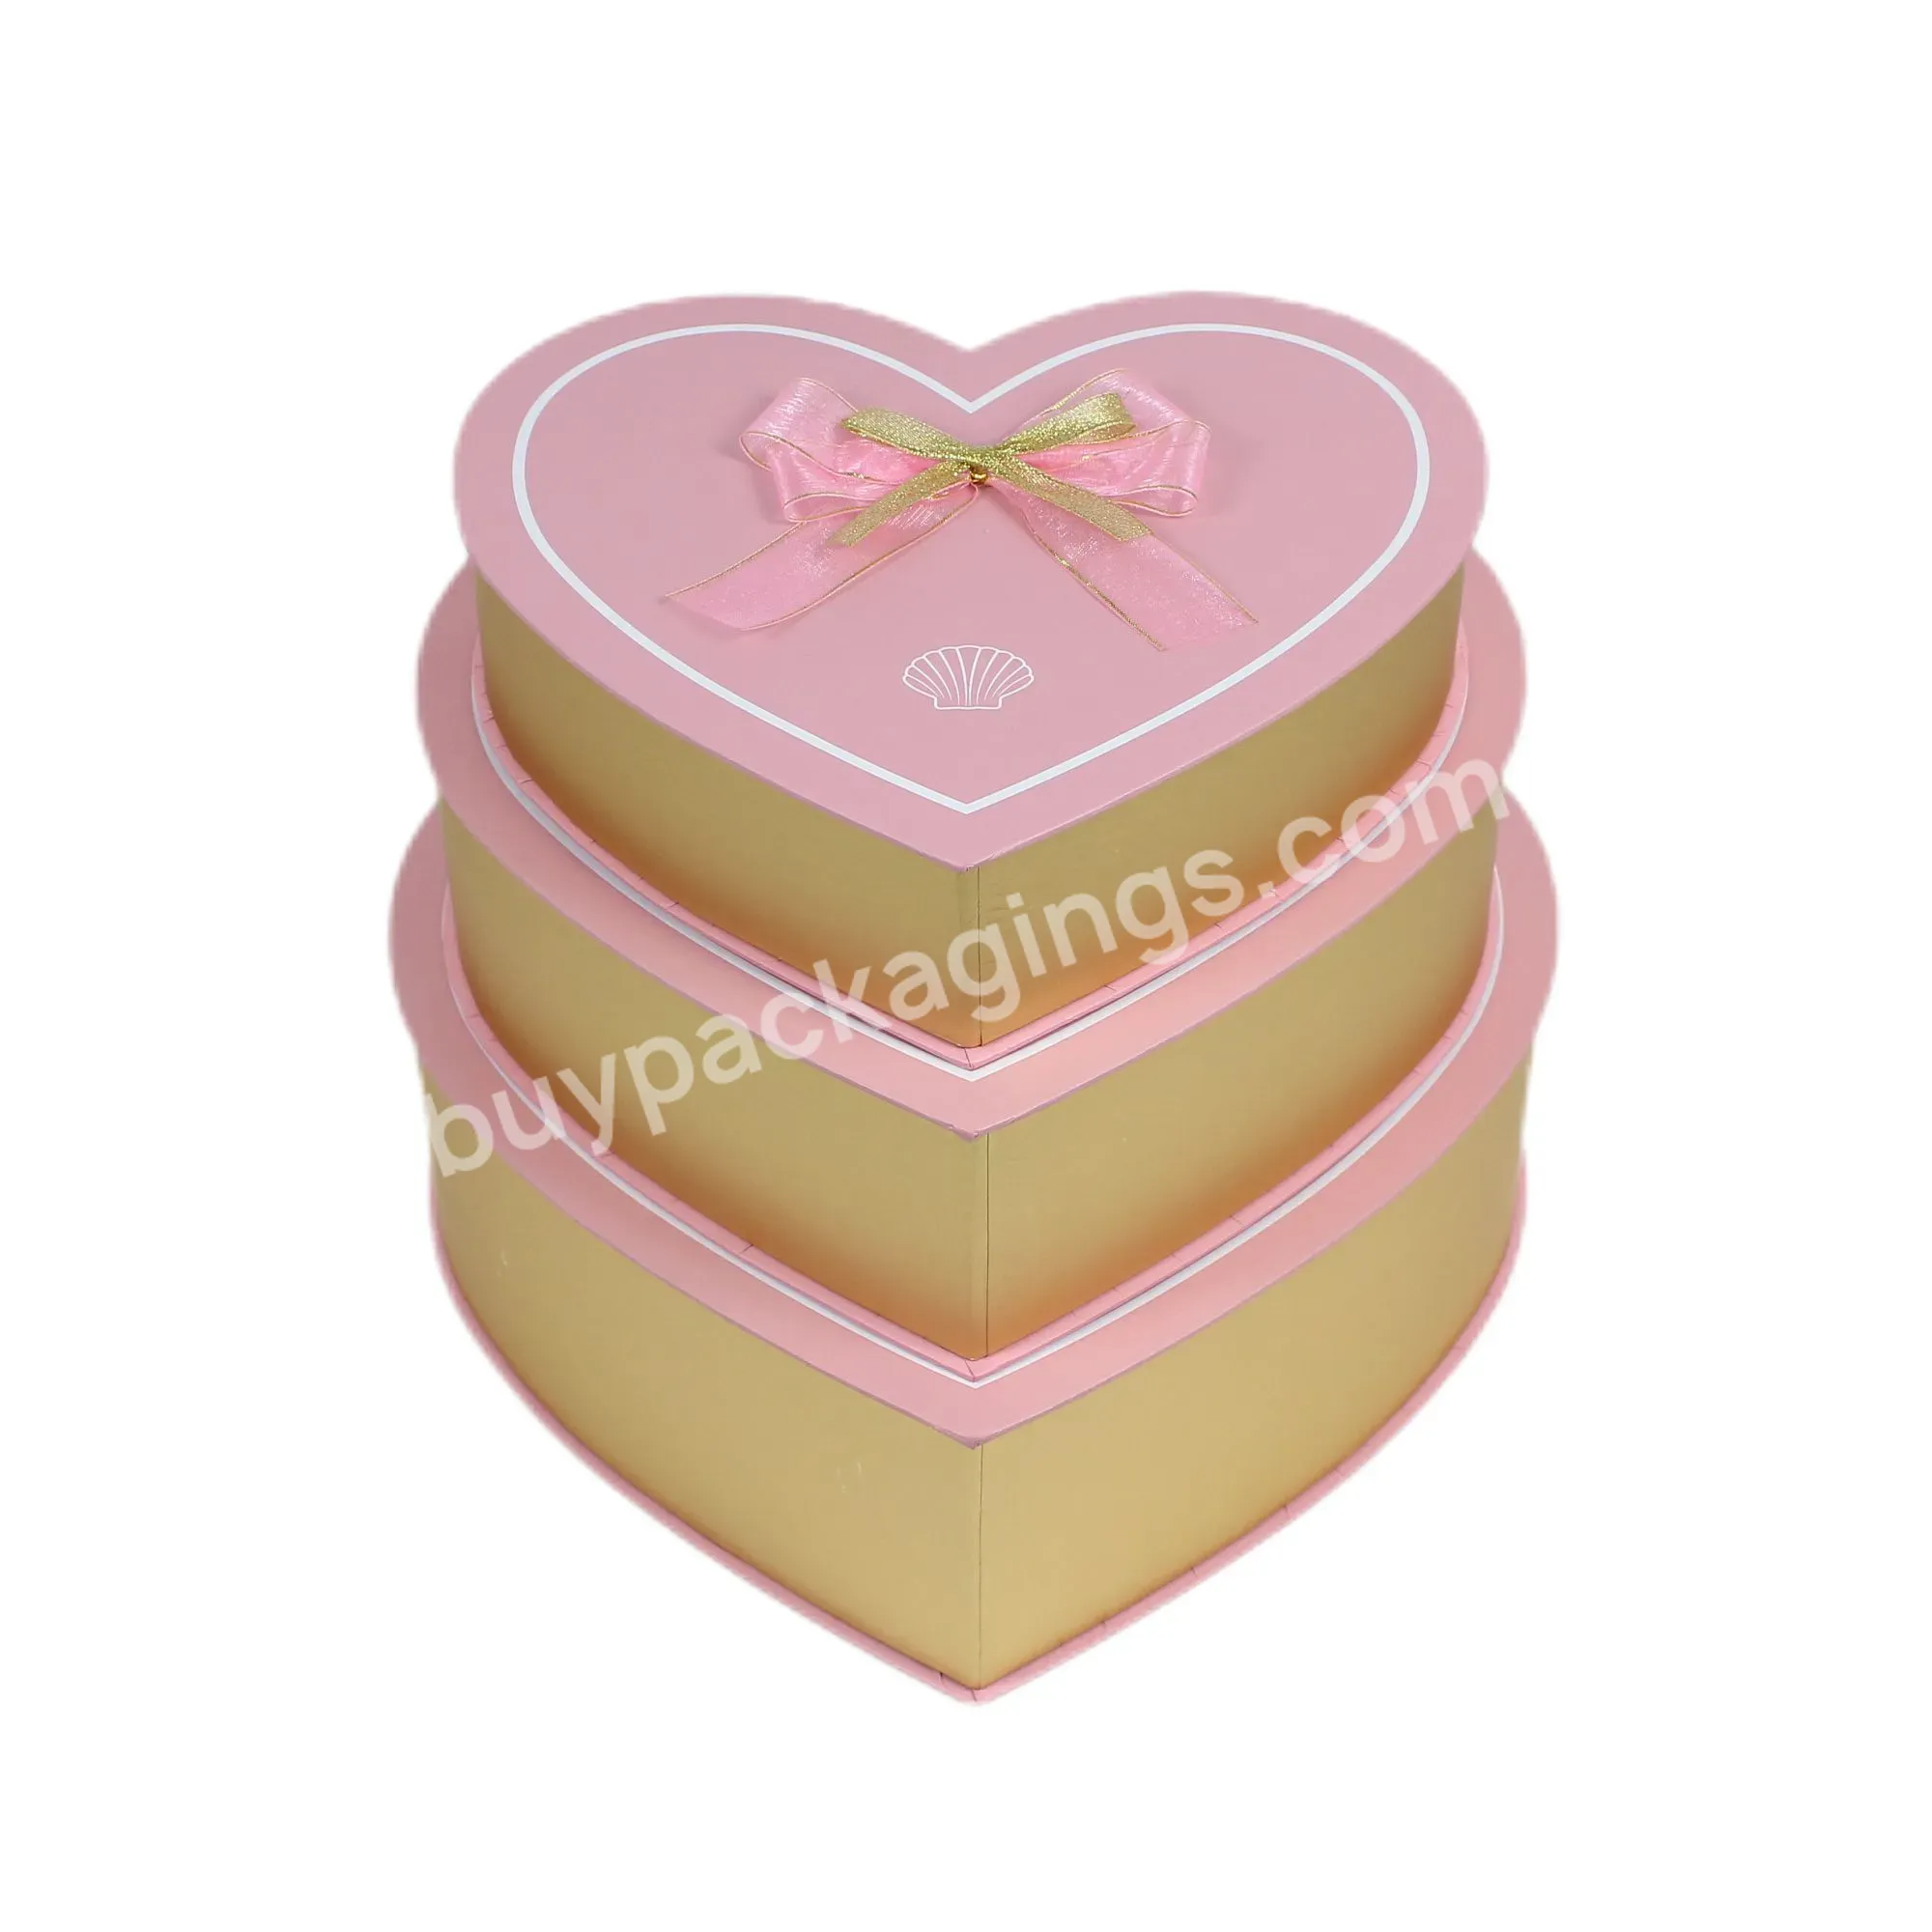 Wholesale Heart Shaped Flower Gift Box Brown Color Paper Box With Colorful Paper Cover - Buy Heart Shaped Flower Gift Box,Brown Color Paper Box,Paper Box With Colorful Paper Cover.